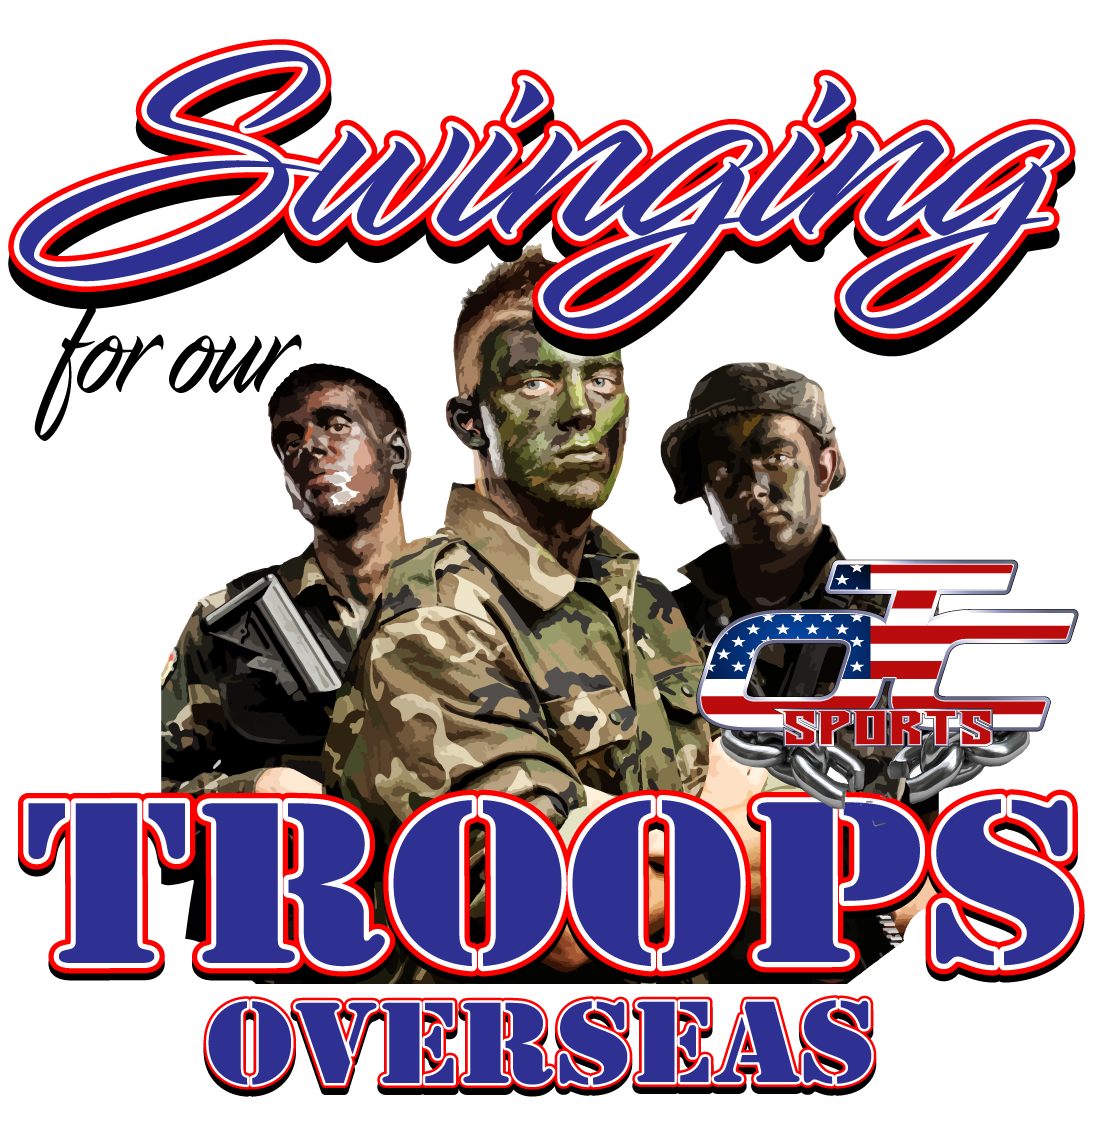 9th Annual Swinging For Our Troops Overseas! Logo